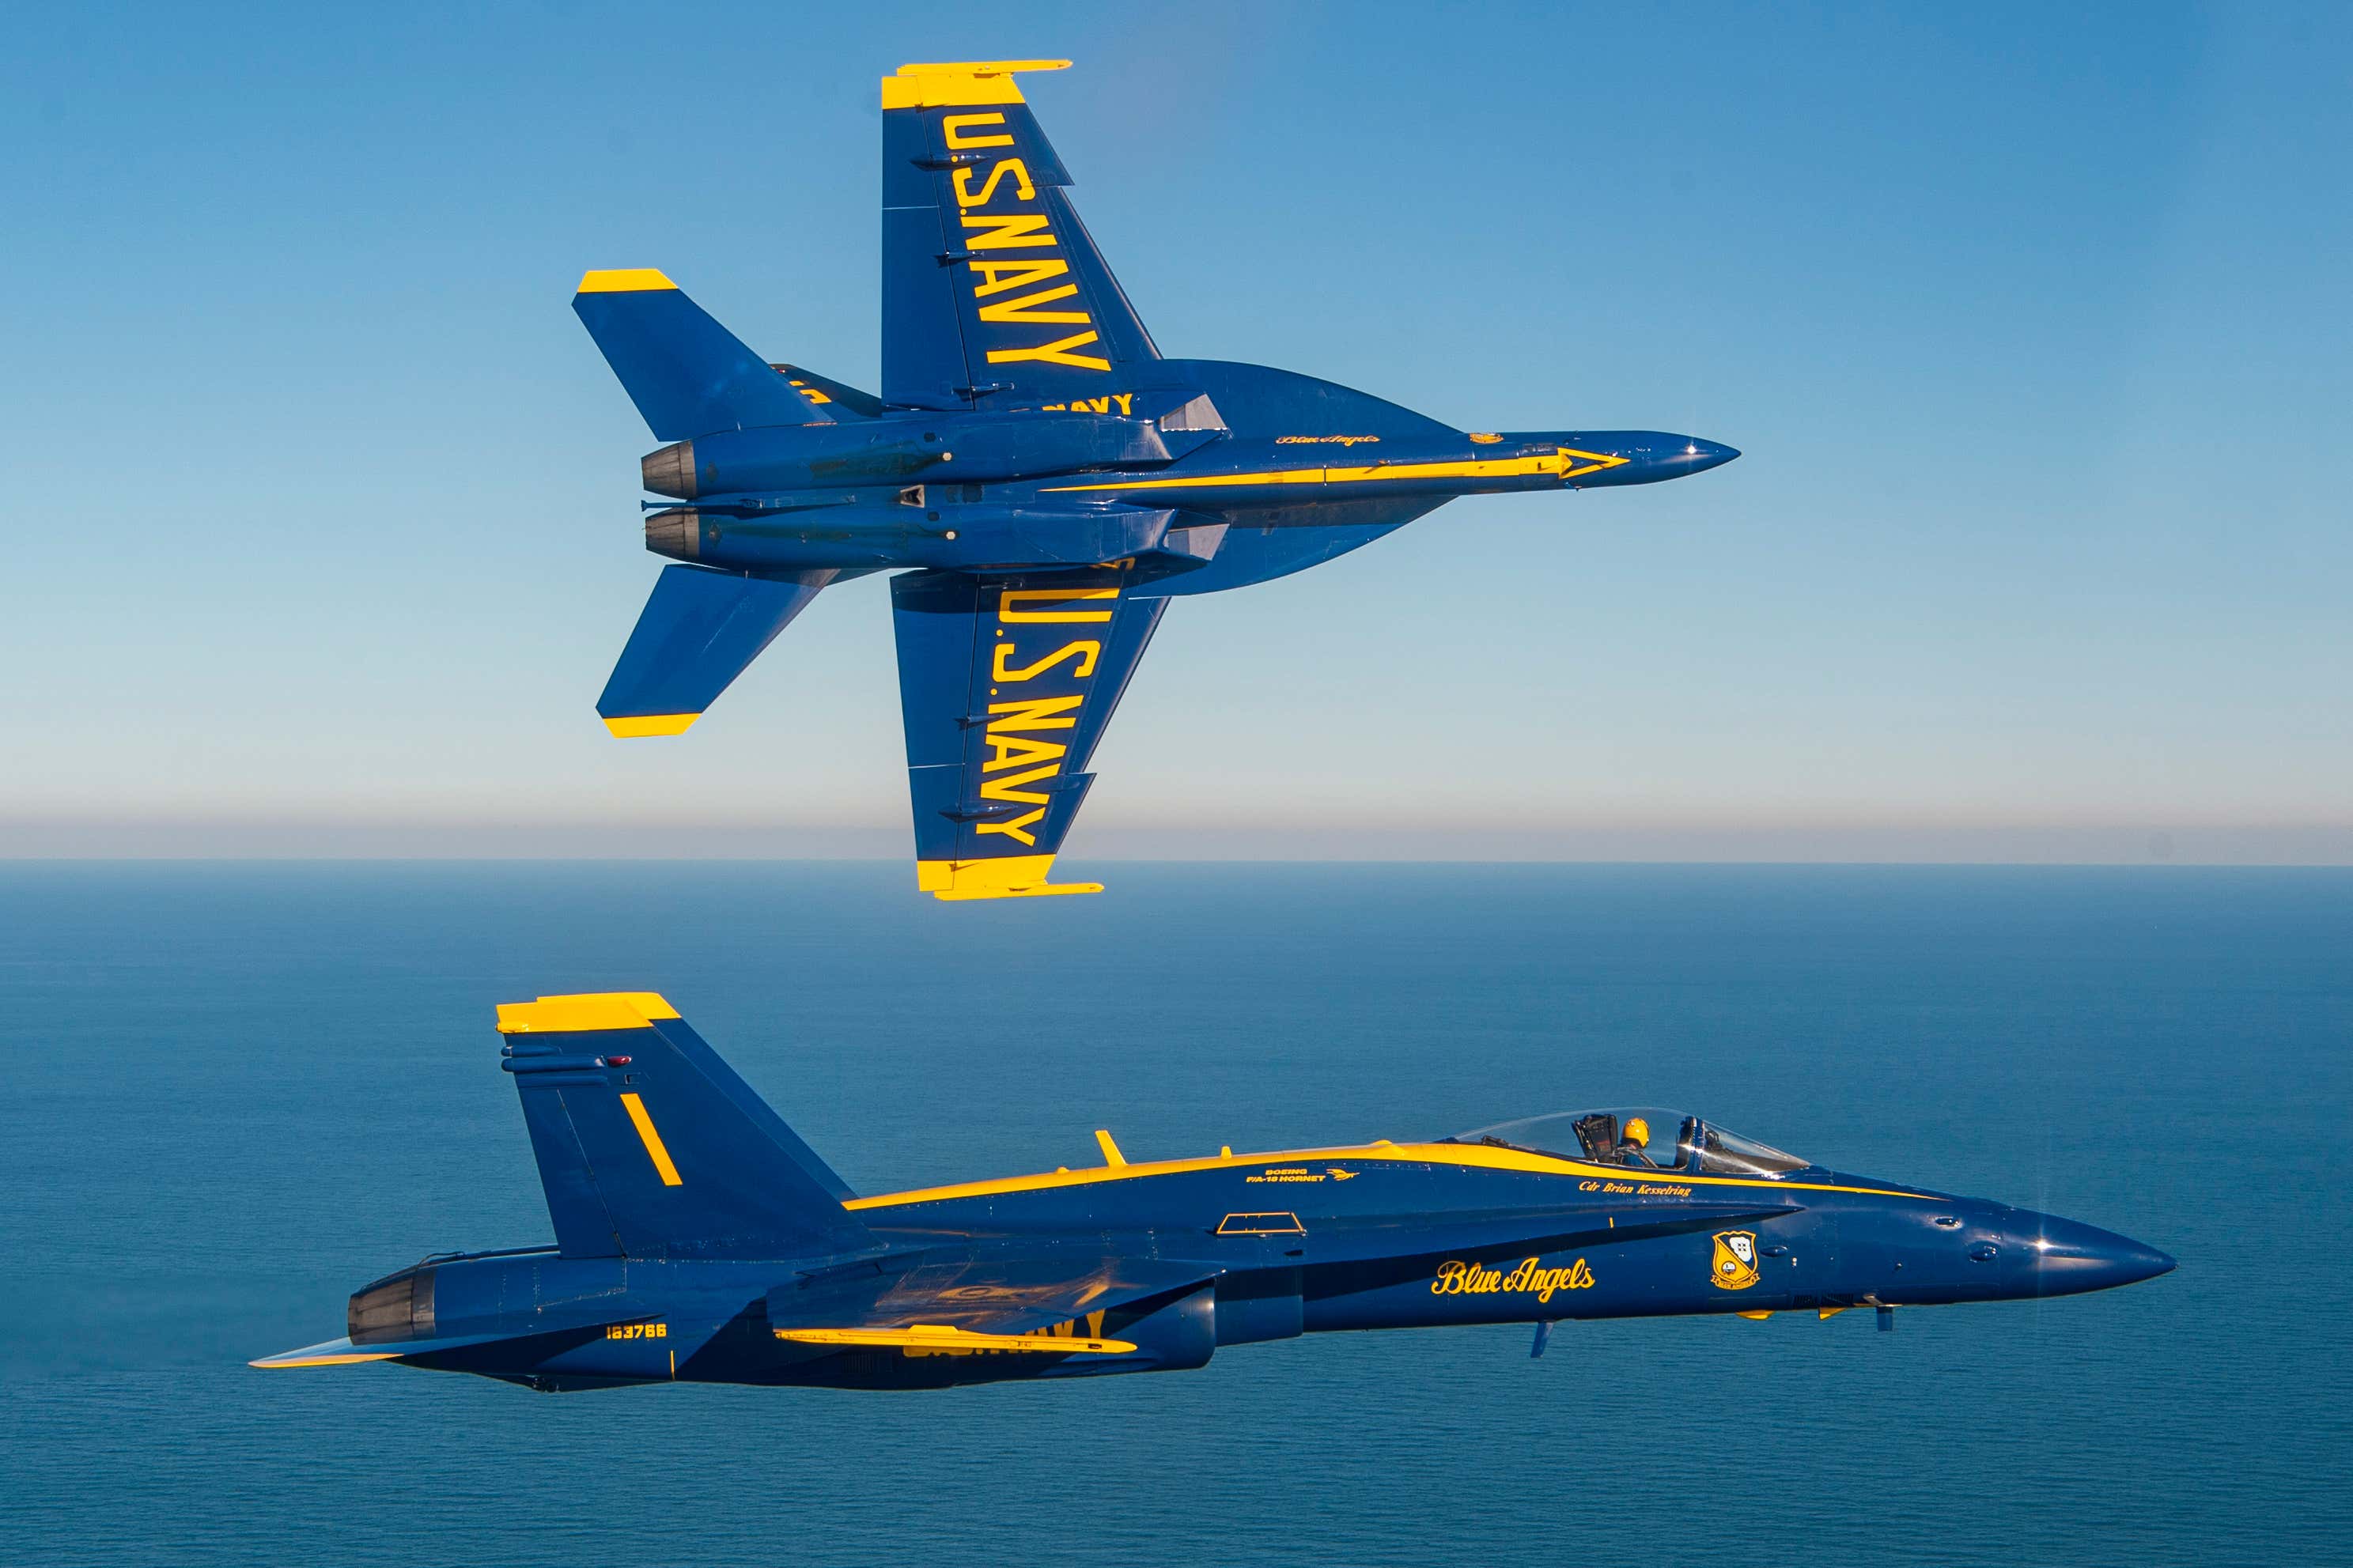 The Blue Angels Just Said Goodbye To The F/A-18 Legacy Hornet With A Final Sunset Flight